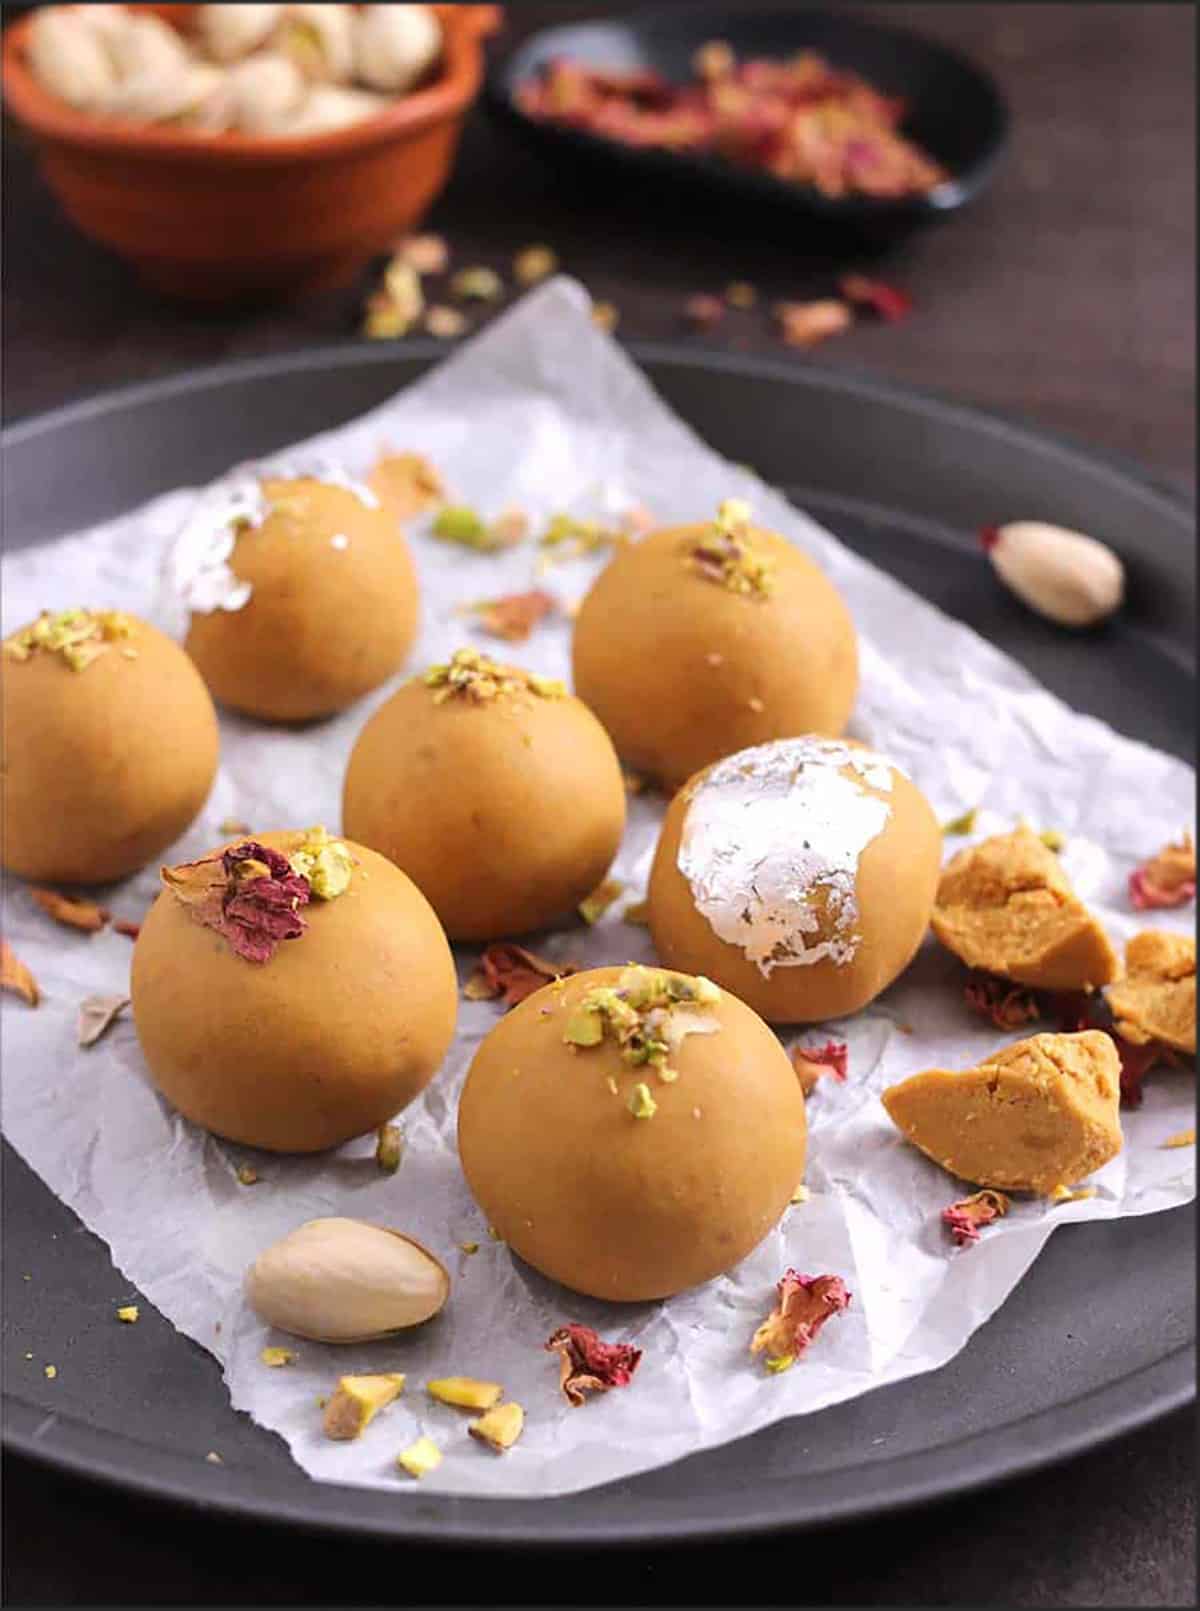 Besan ladoos (bandar laddu) placed in a black plate on a parchment paper.